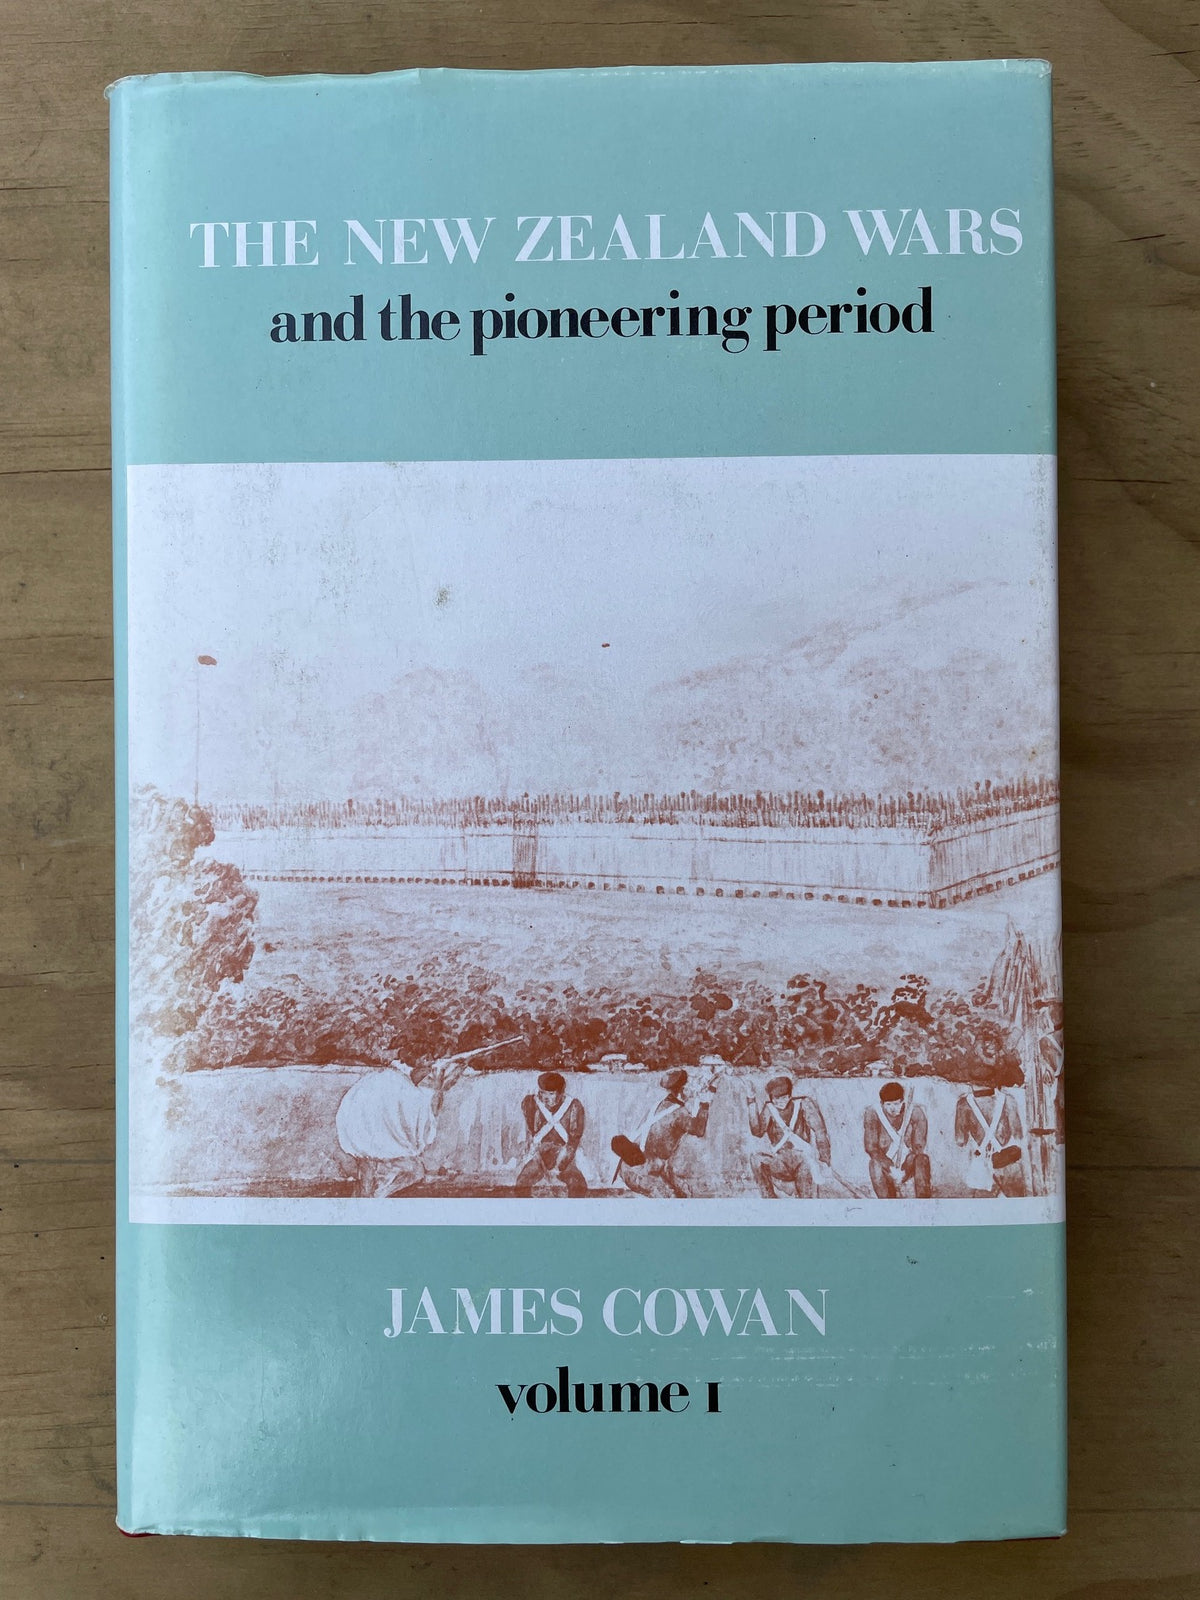 The New Zealand Wars and the Pioneering Period (two volume set) - James Cowan